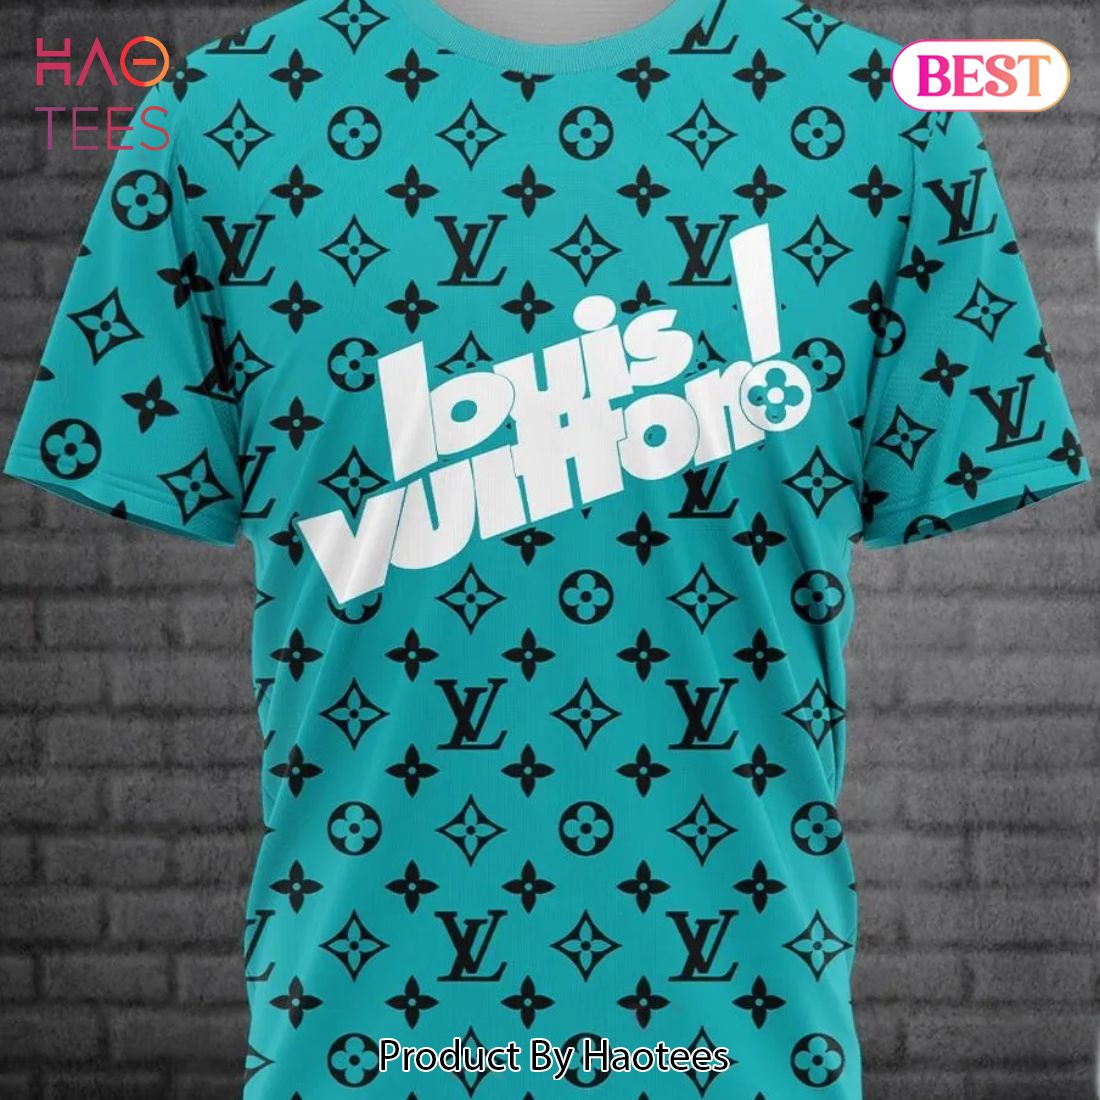 [NEW FASHION] Louis Vuitton Teal Luxury Brand T-Shirt Outfit For Men Women